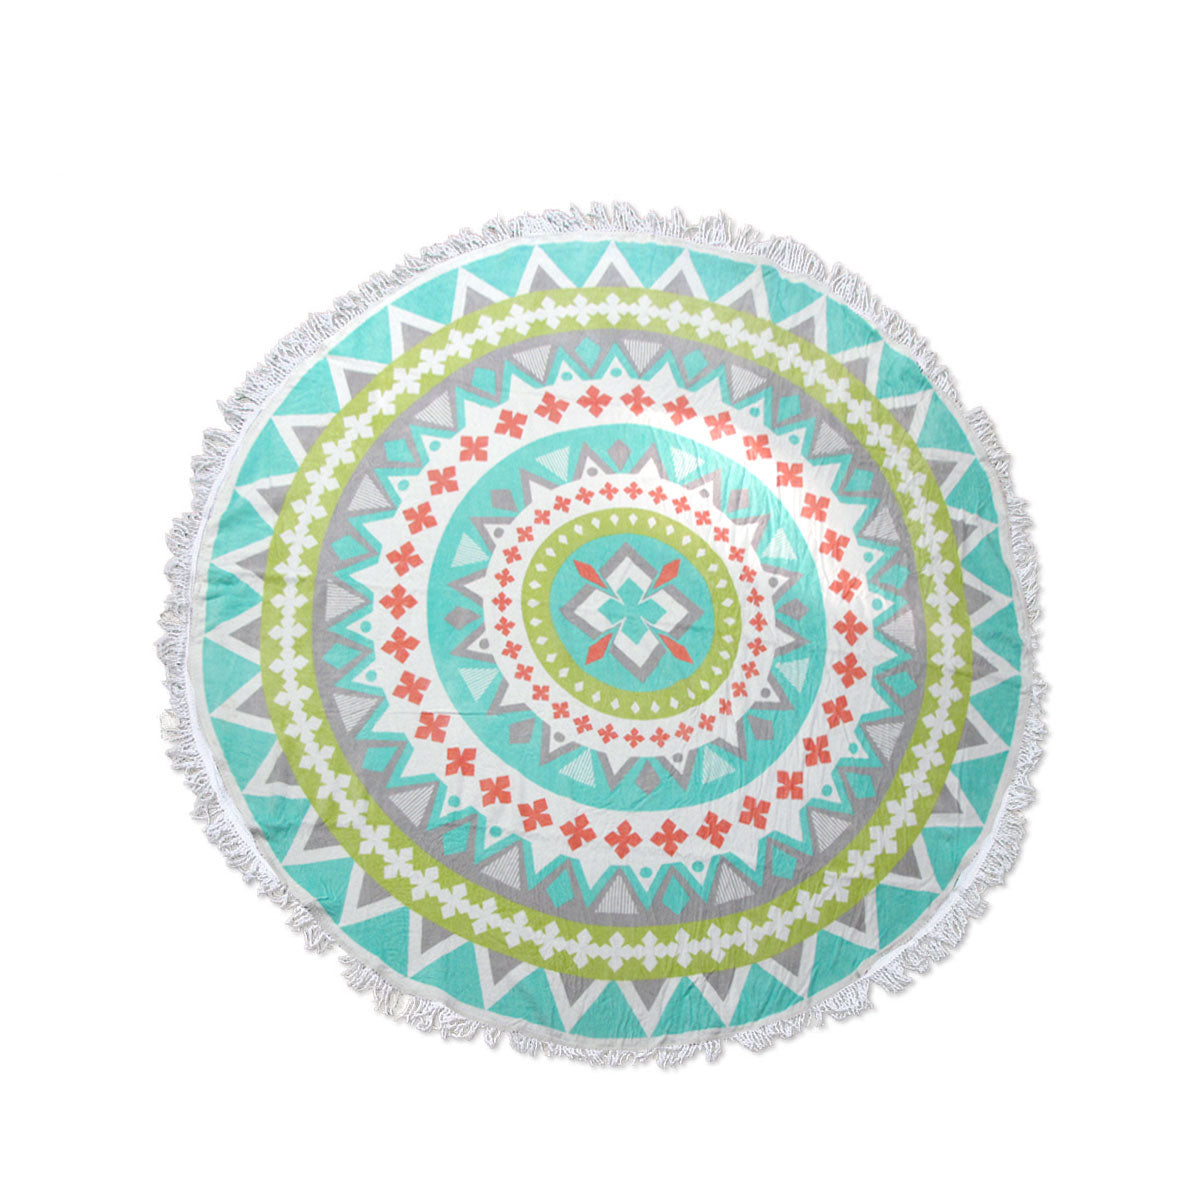 Zoey Bright Colors 100% Cotton Round Beach Towel